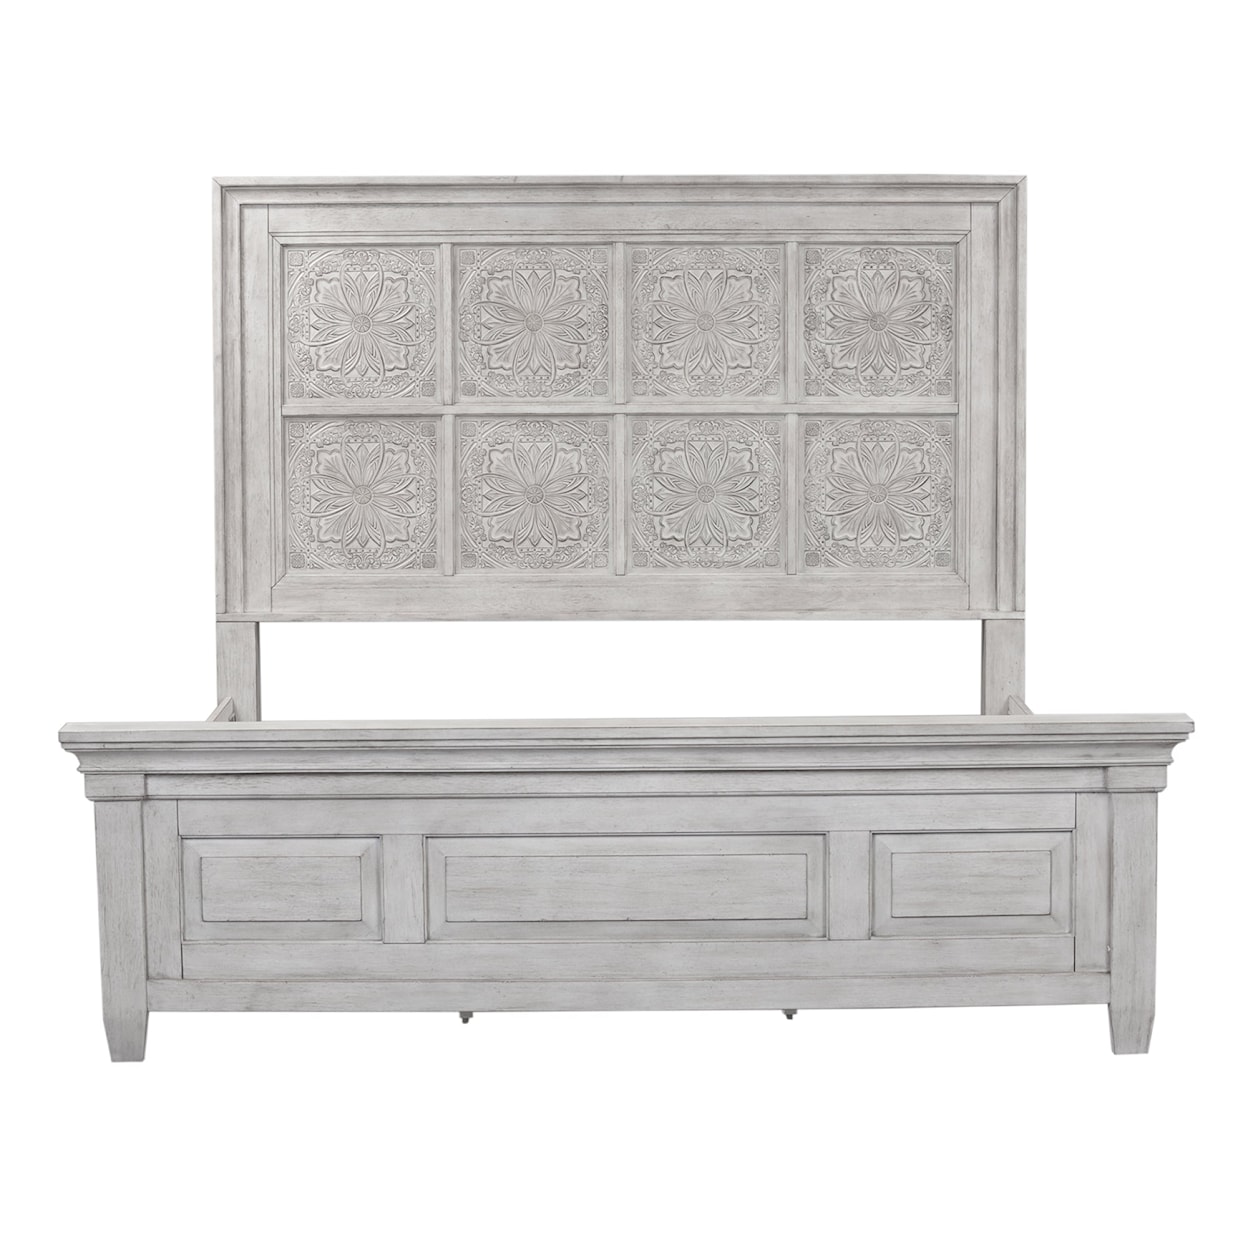 Libby Haven 4-Piece Decorative King Panel Bedroom Group